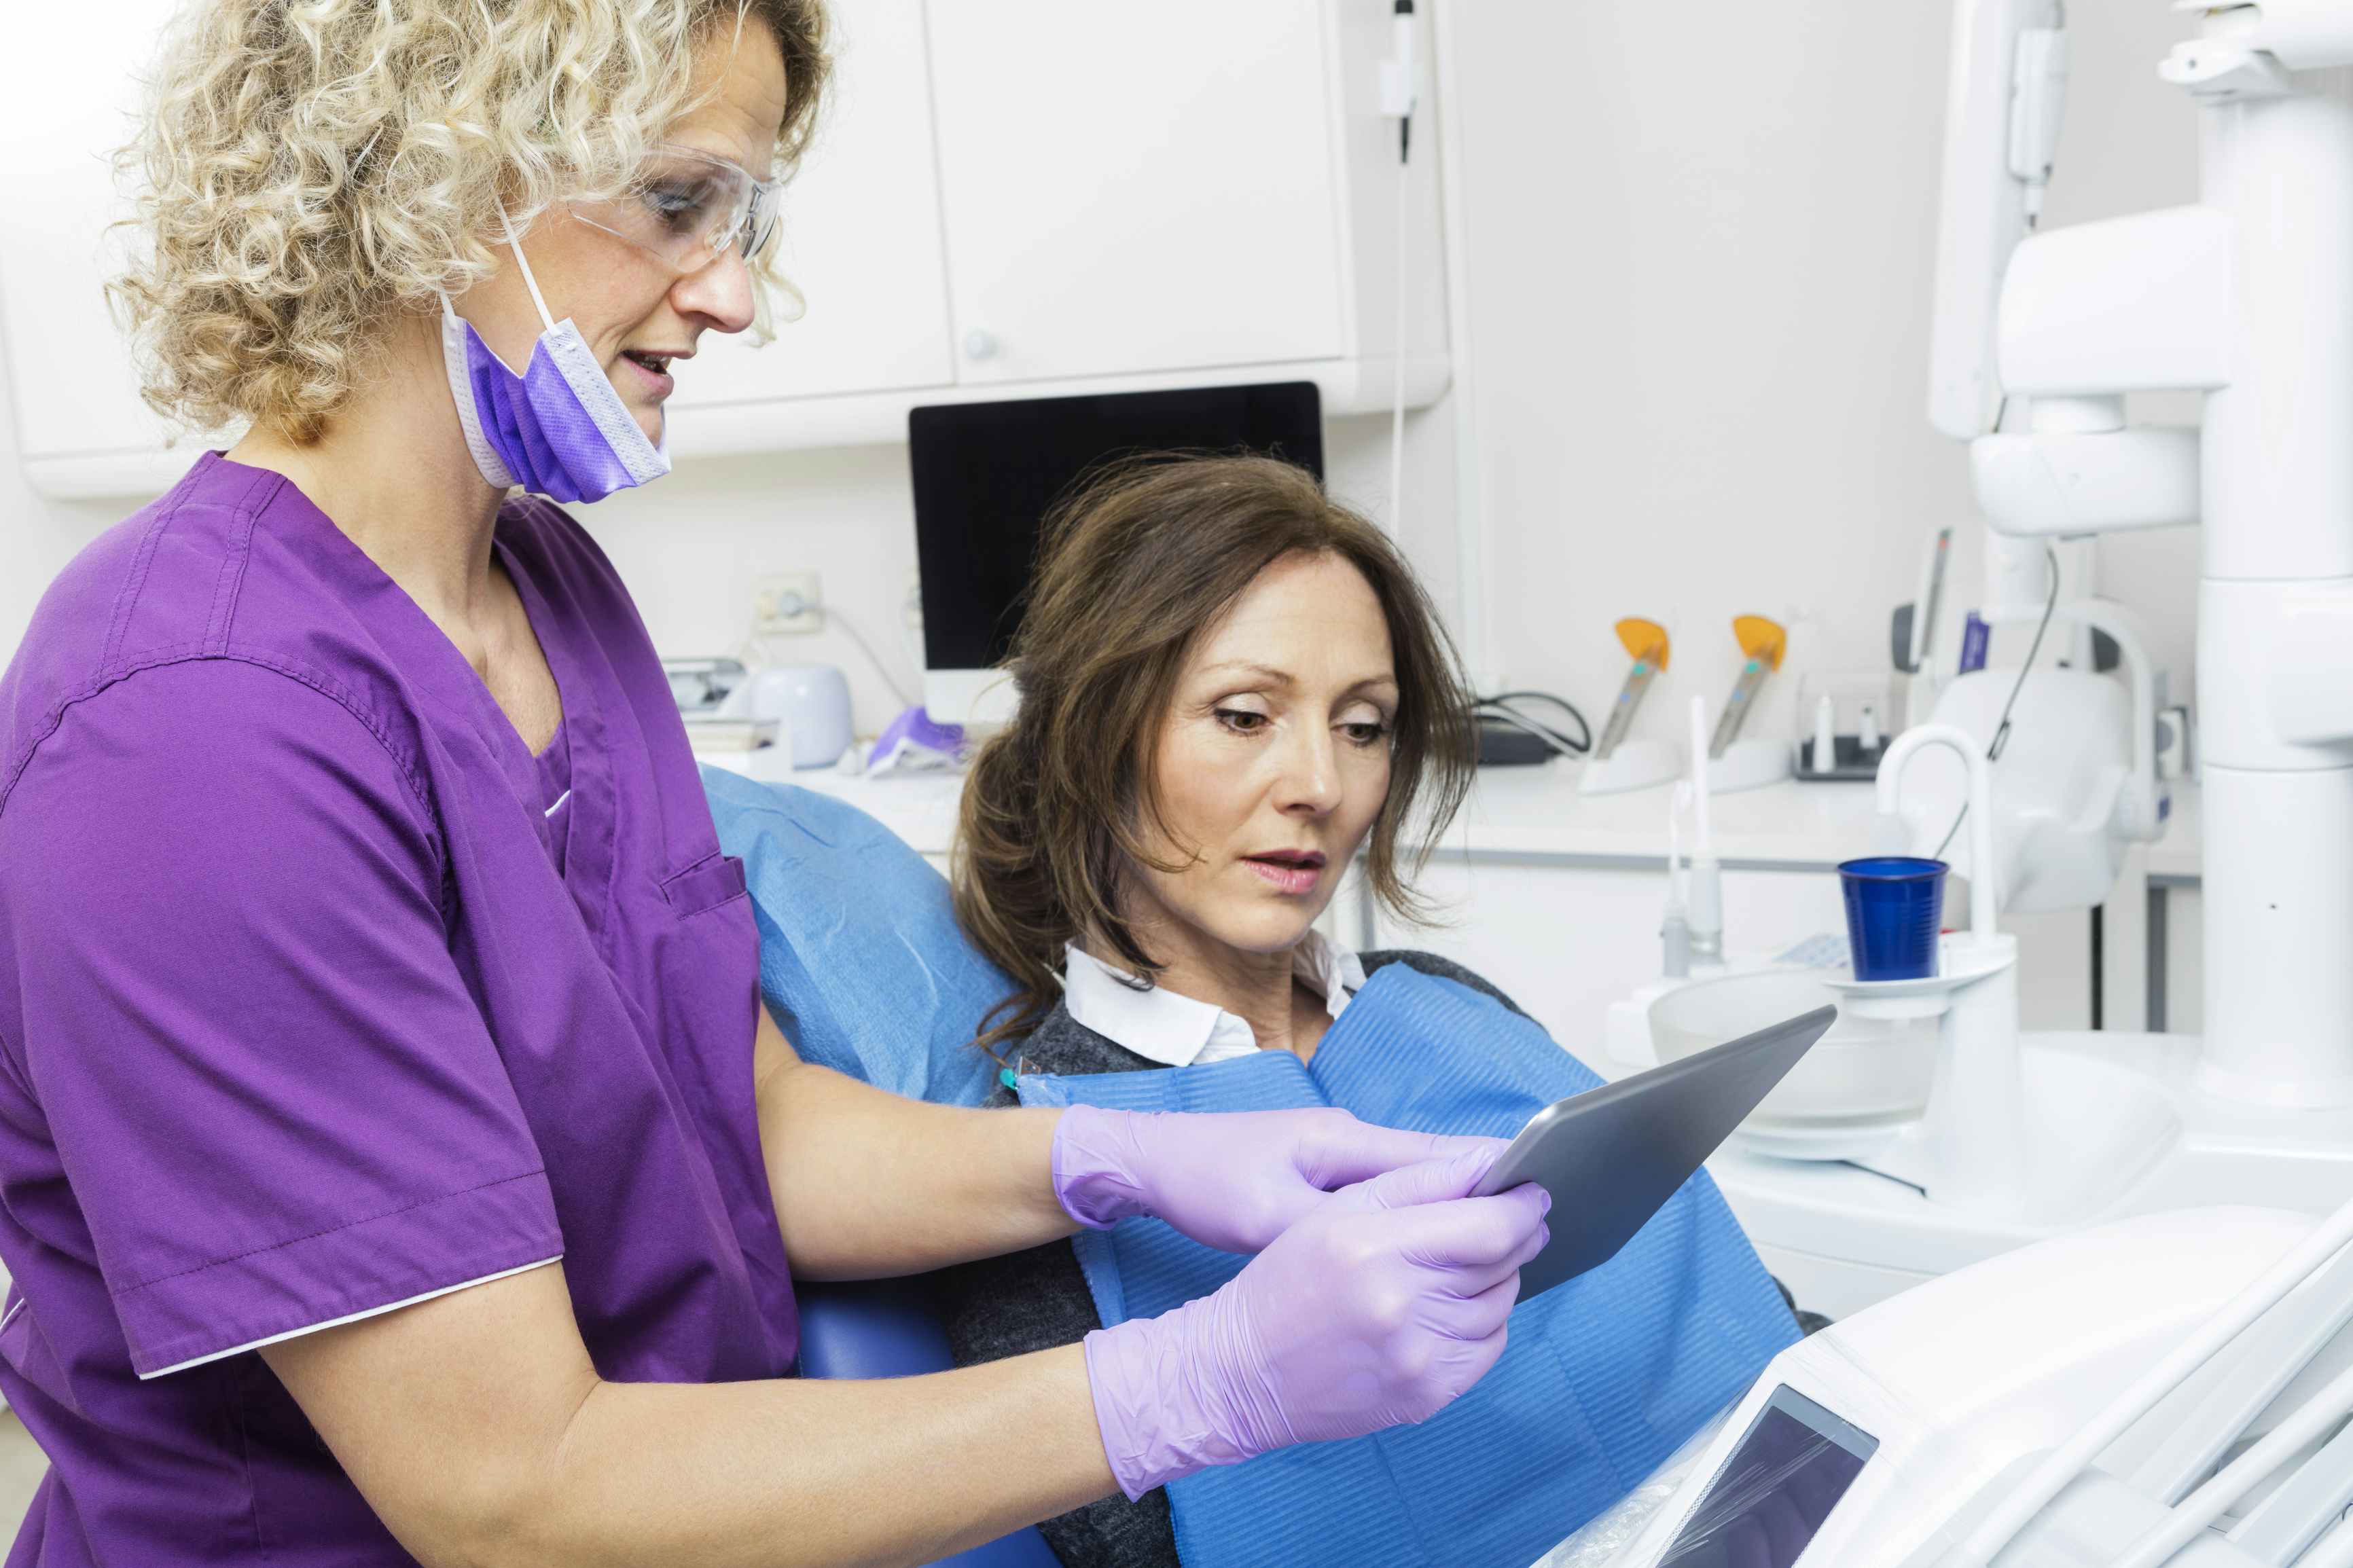 A dentist showing a patient something on a tablet